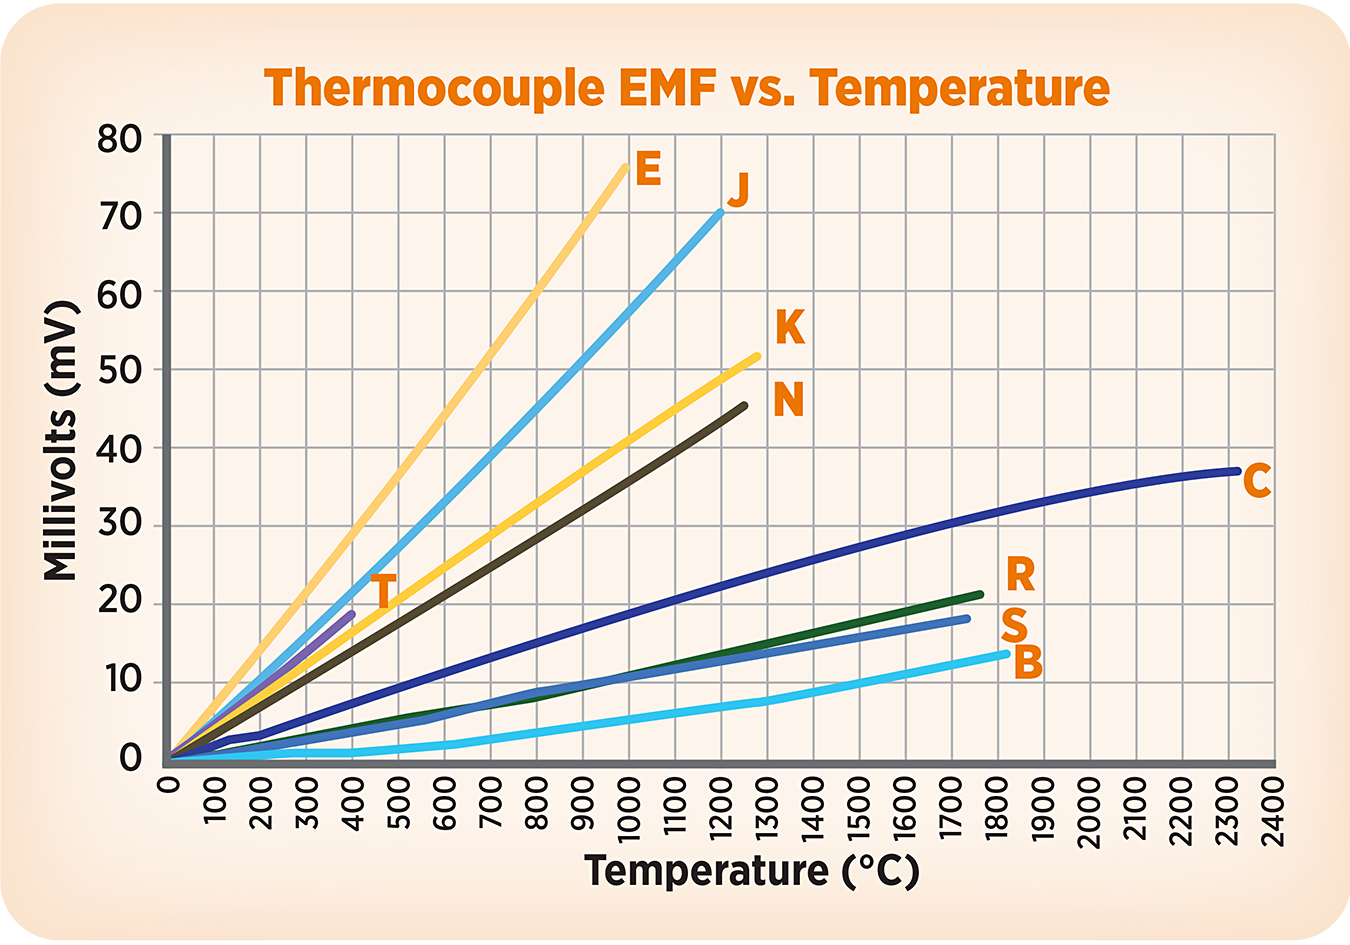 https://thermalprocessing.com/wp-content/uploads/2023/05/TP-2023-05-Feat-2-Fig-1.jpg